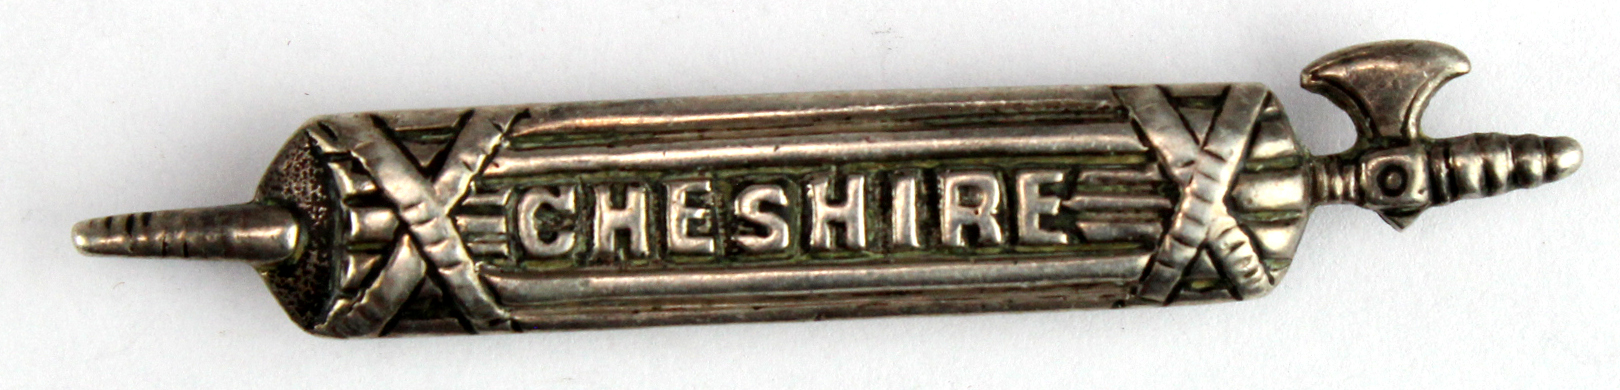 Badge - The 22nd (Cheshire) Regiment of Foot unmarked silver fasces badge - (this is part of the